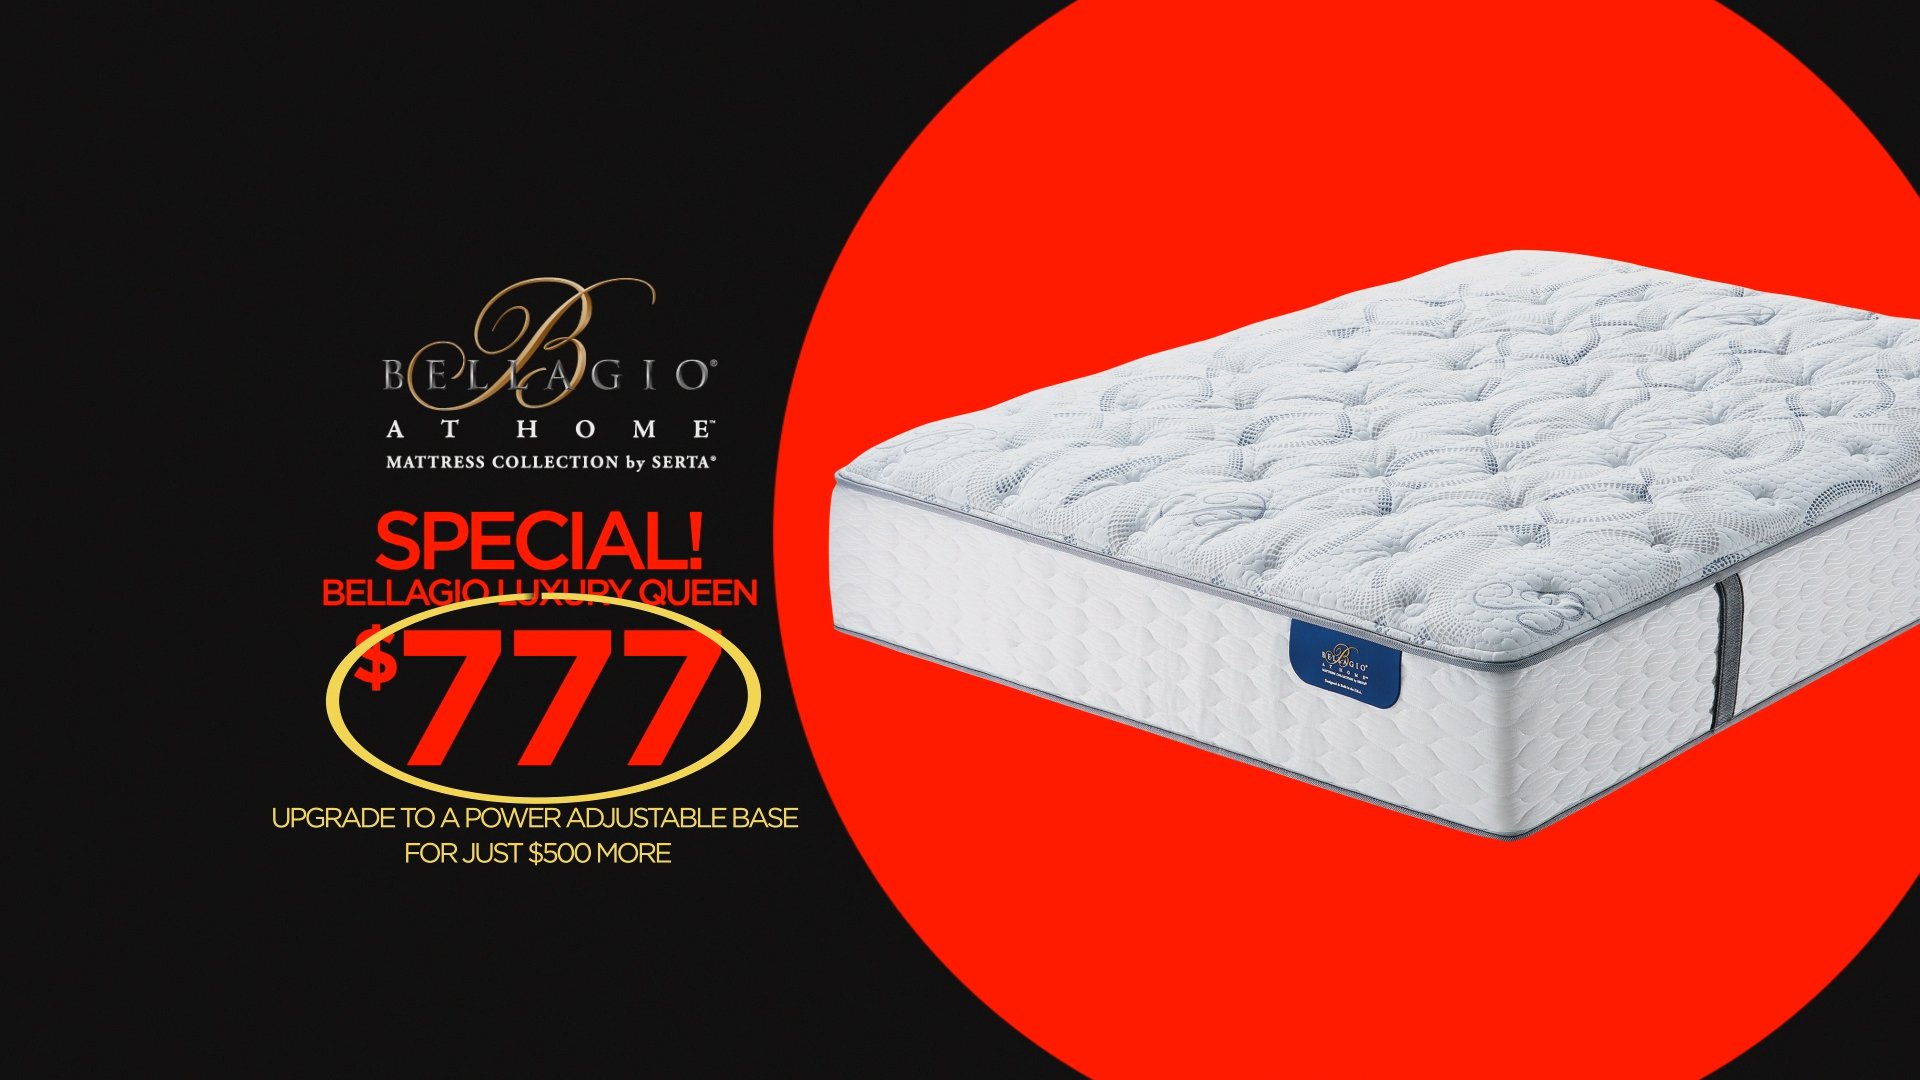 Hudson S Furniture On Twitter Enjoy The Luxury Of A 5 Star Night S Sleep With The Bellagio Mattress Named After The Famed Lasvegas Hotel From Sertamattresses At Https T Co G2rk1tsf5b Https T Co Cphlnmlwqq